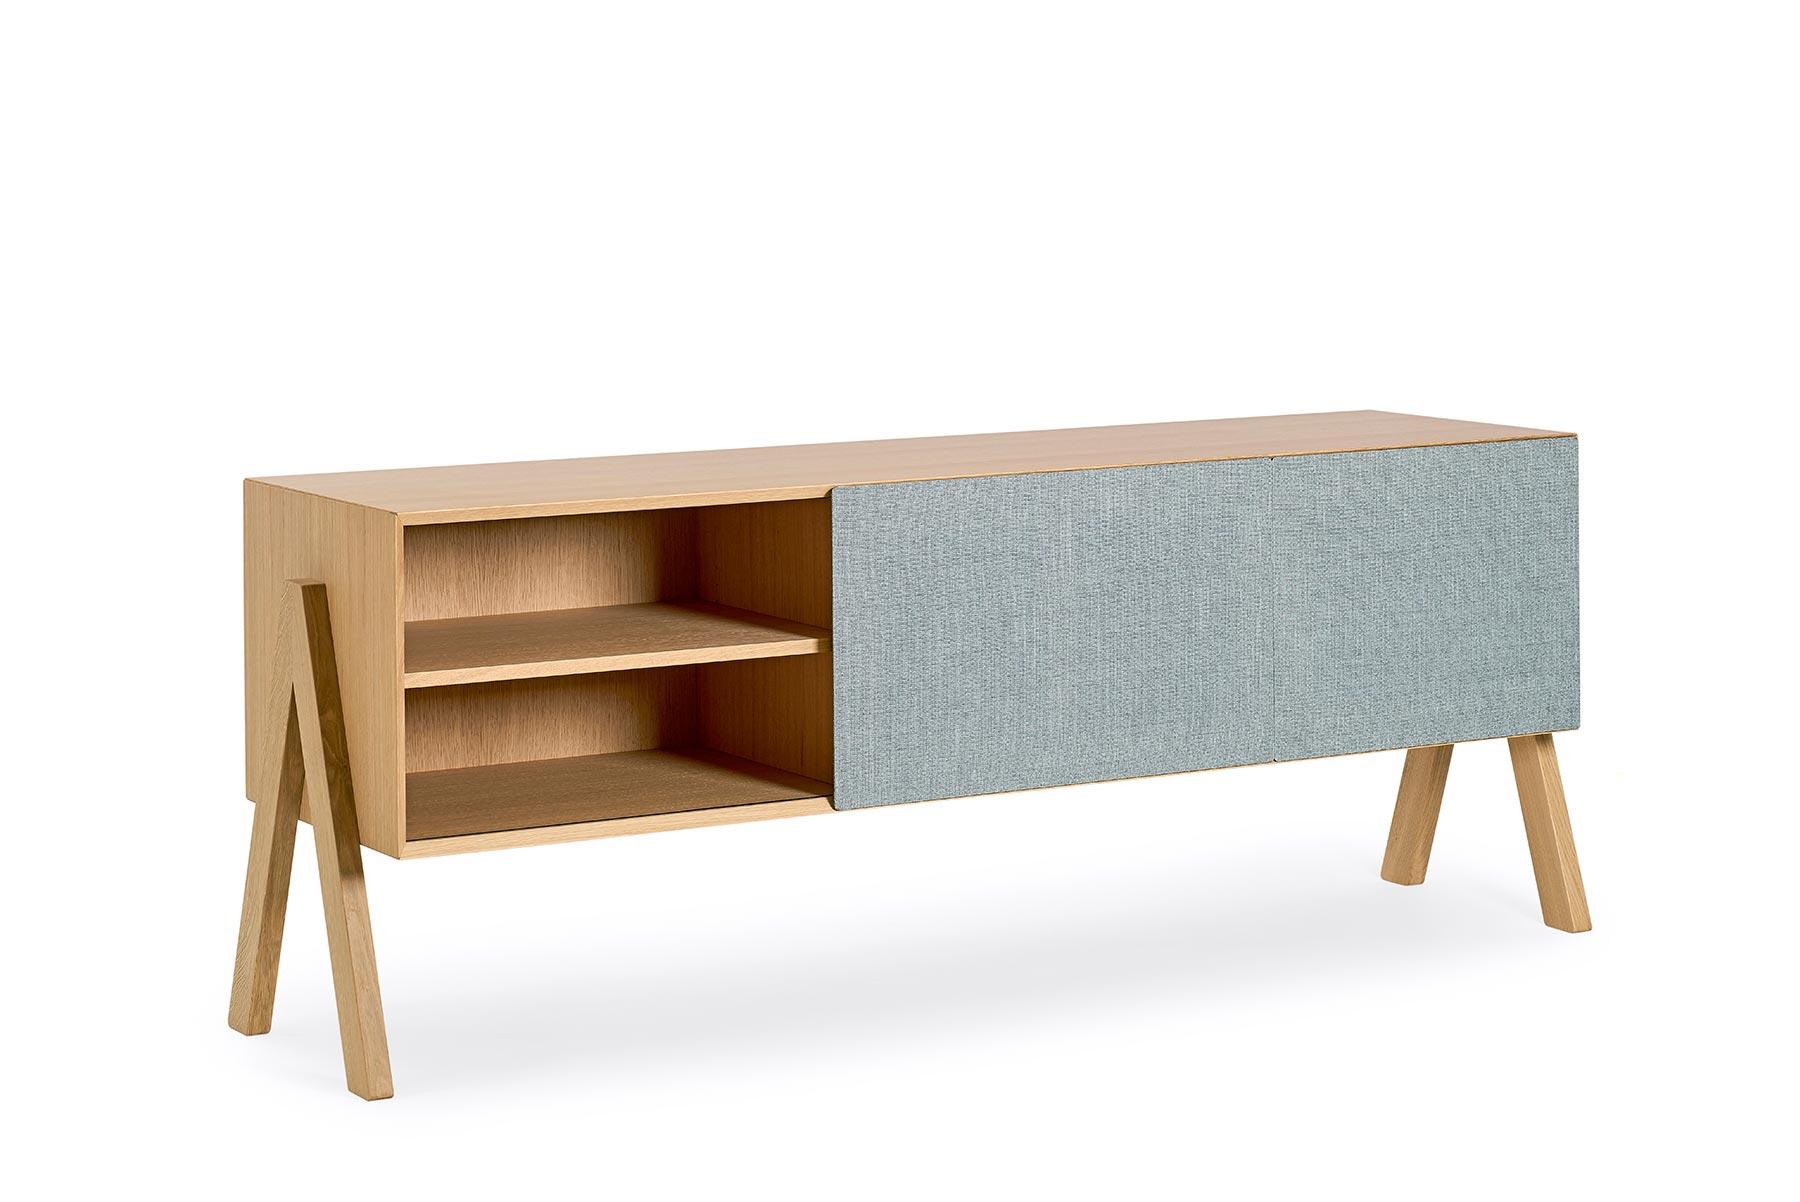 Designed by Friis and Moltke in 2017, this Minimalist’s credenza features exterior mounted V, legs with two cloth cabinet doors that slide from one bay to the next. Crafted in solid wood, this credenza is hand built at GETAMA’s factory in Gedsted,